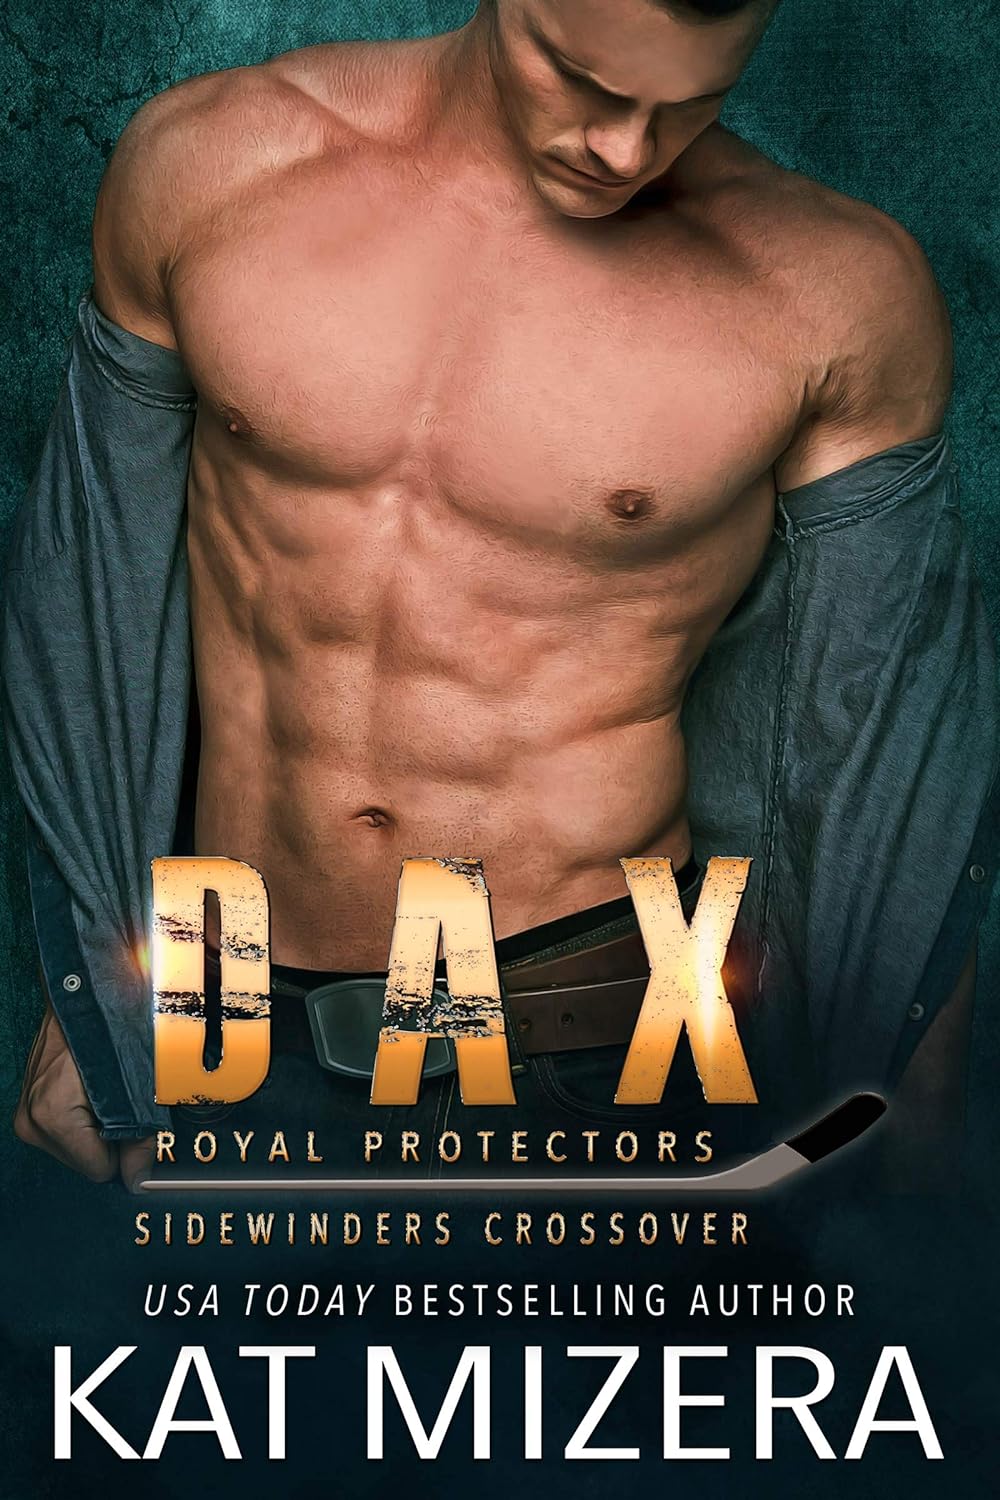 DAX: Royal Protectors/Sidewinders Crossover